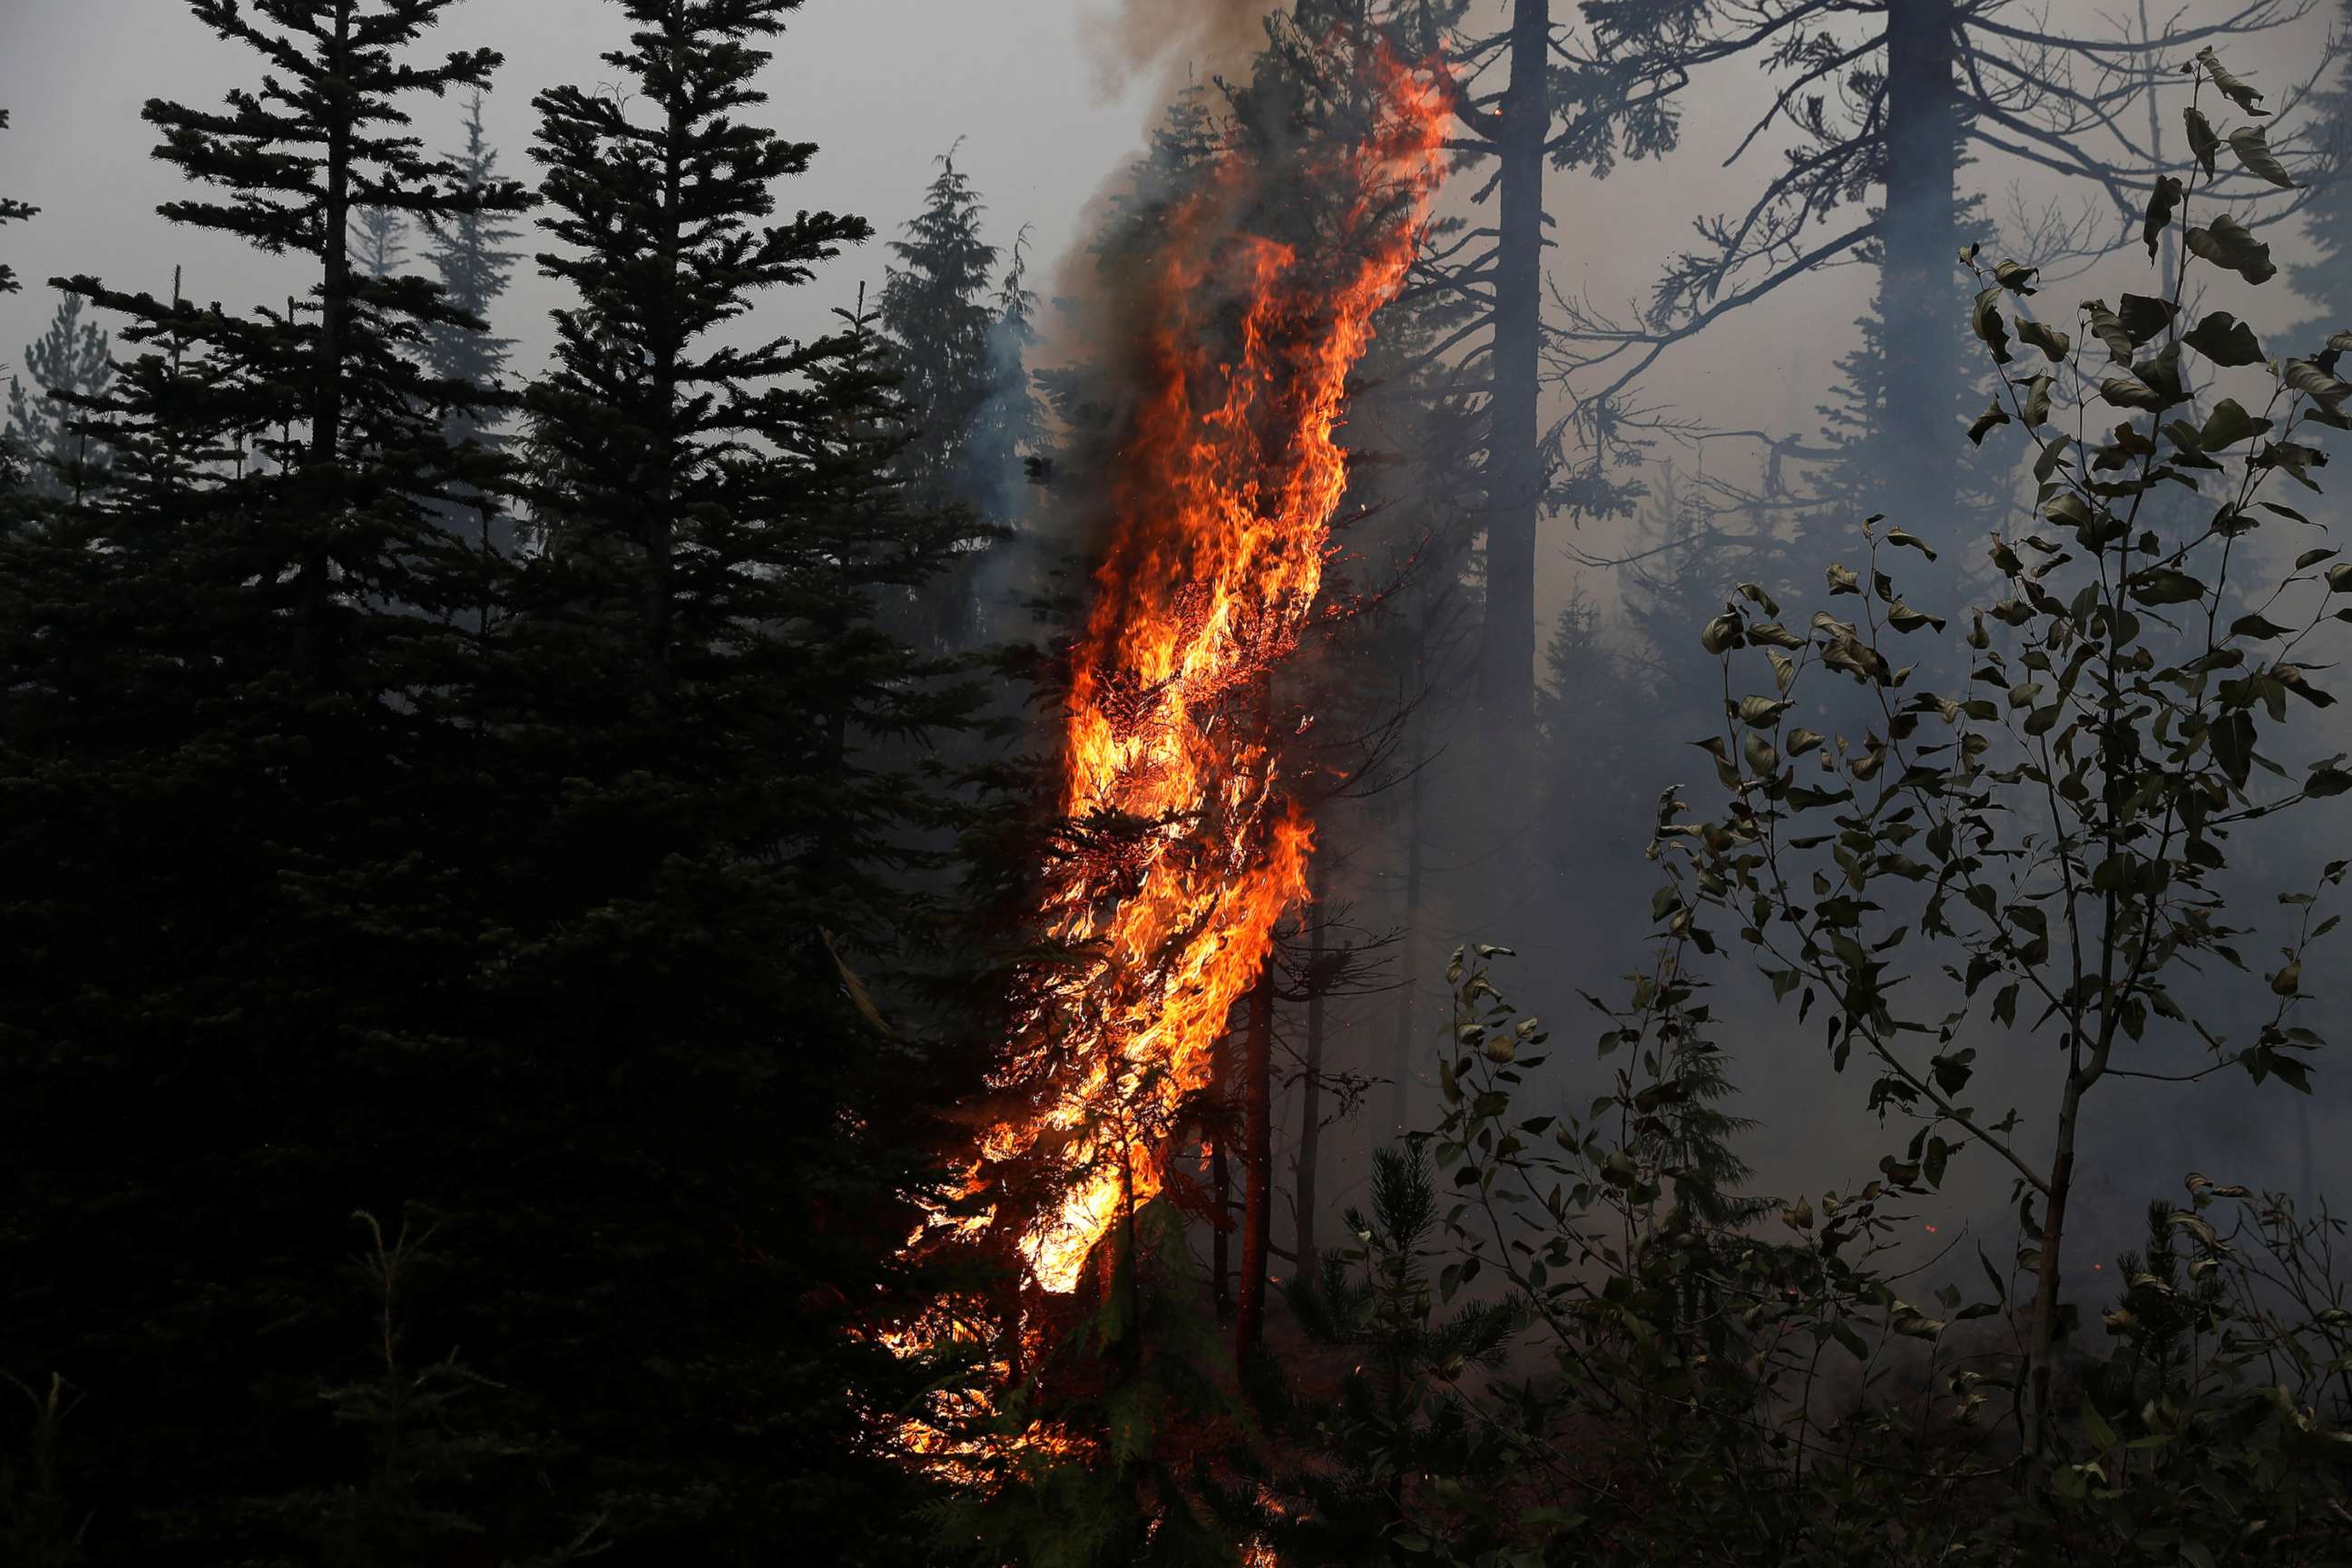 PHOTO: Fire burns on the remains of fire damaged trees as smoke billows in the aftermath of the Beachie Creek fire near Detroit, Ore., Sept. 14, 2020. 